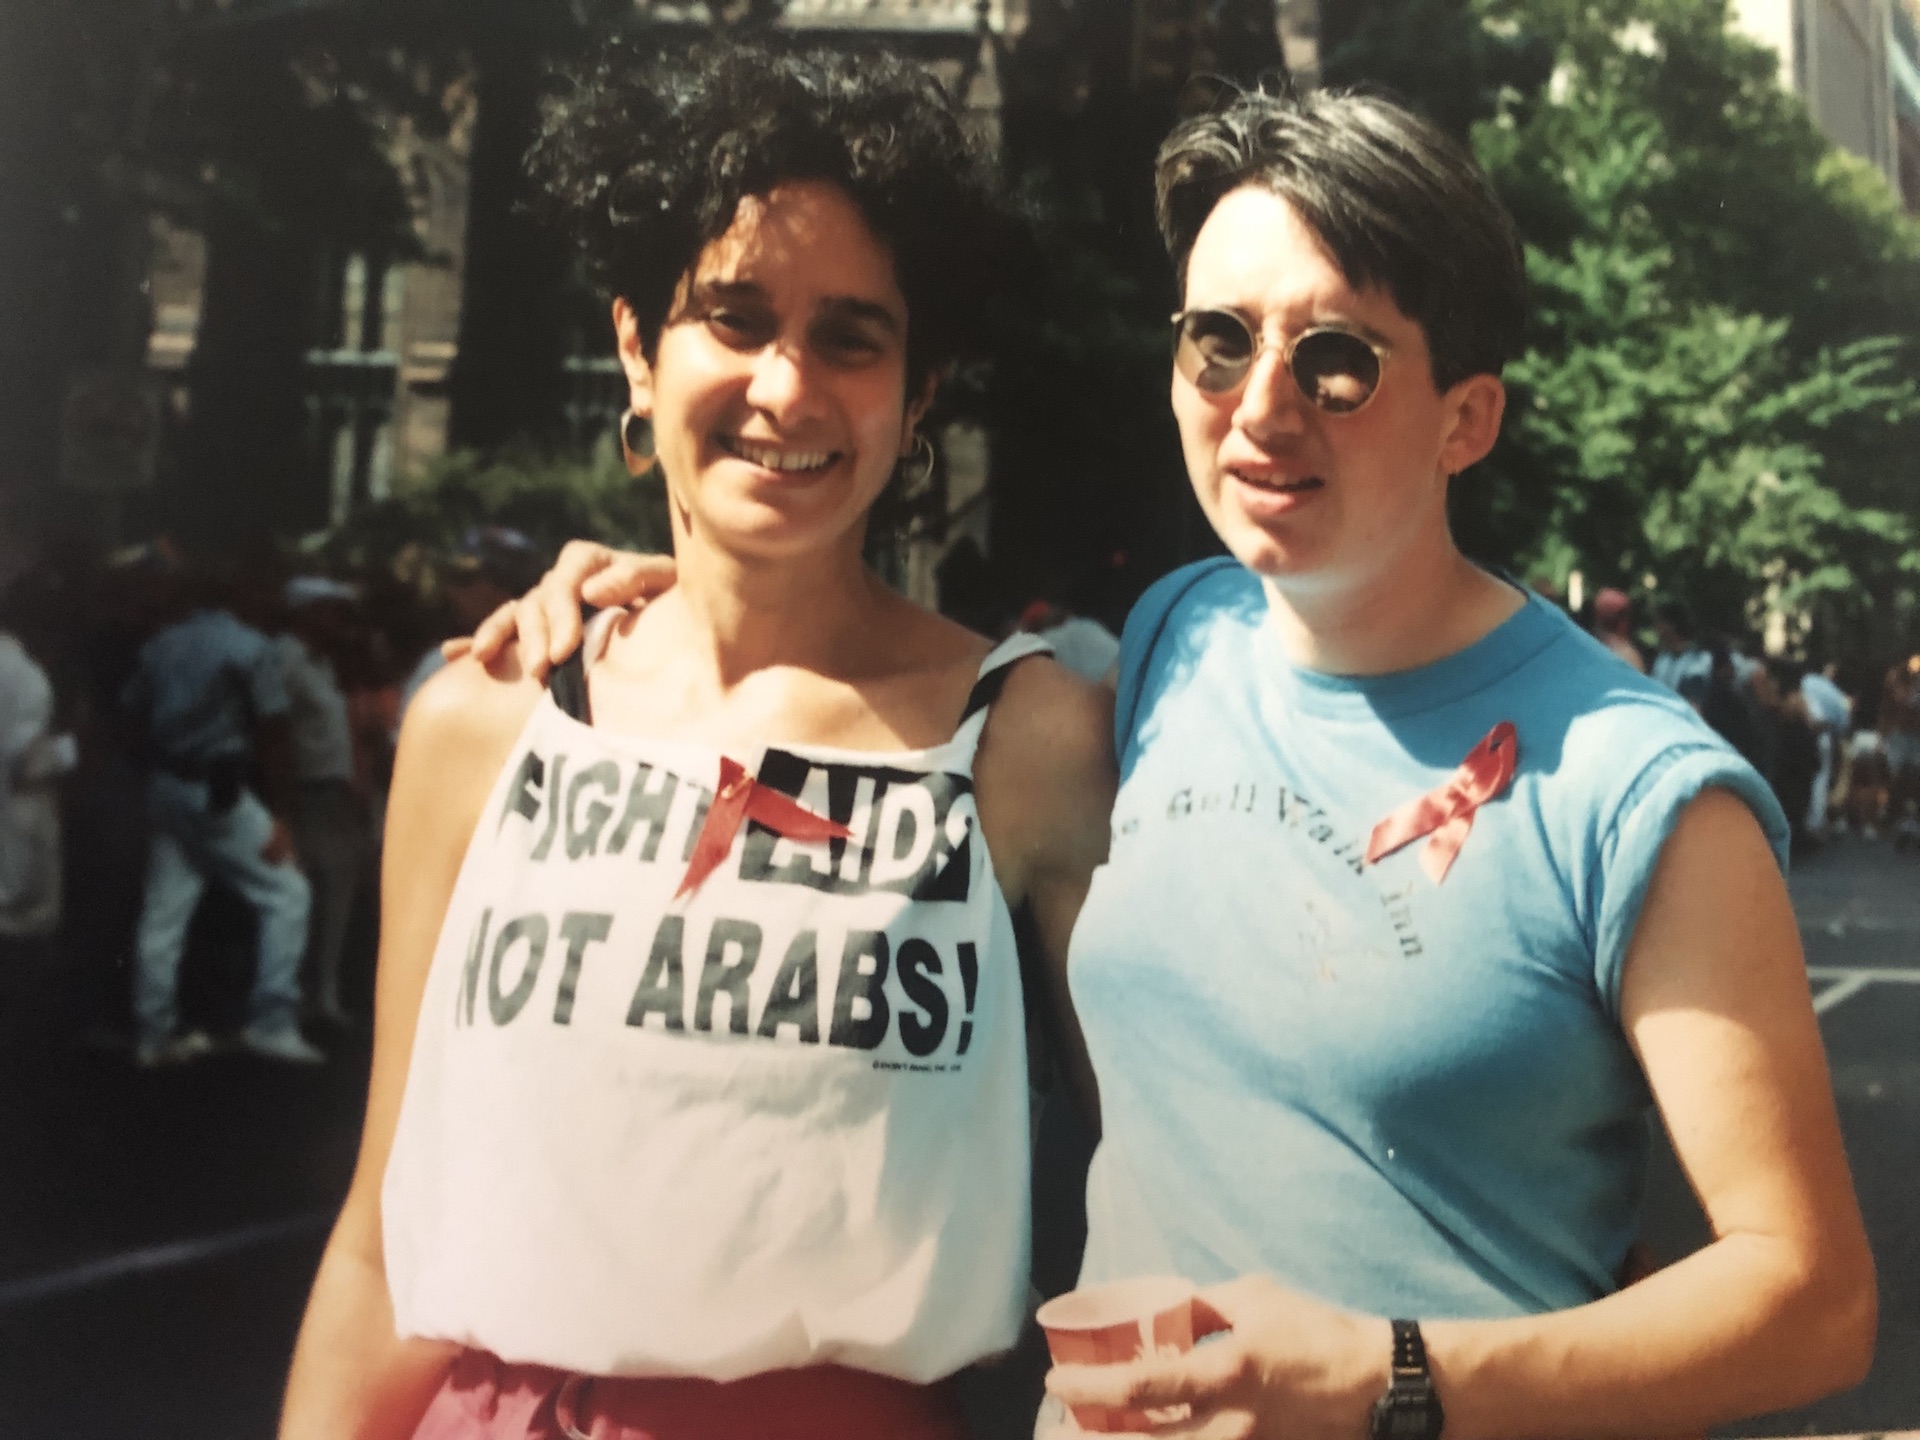 Cheryl and her partner Cris at Gay Pride, New York, NY, 1982. She shares, “this is the first weekend we came out as a couple. We had been friends for months then something clicked!” Photo courtesy of Cheryl Qamar.